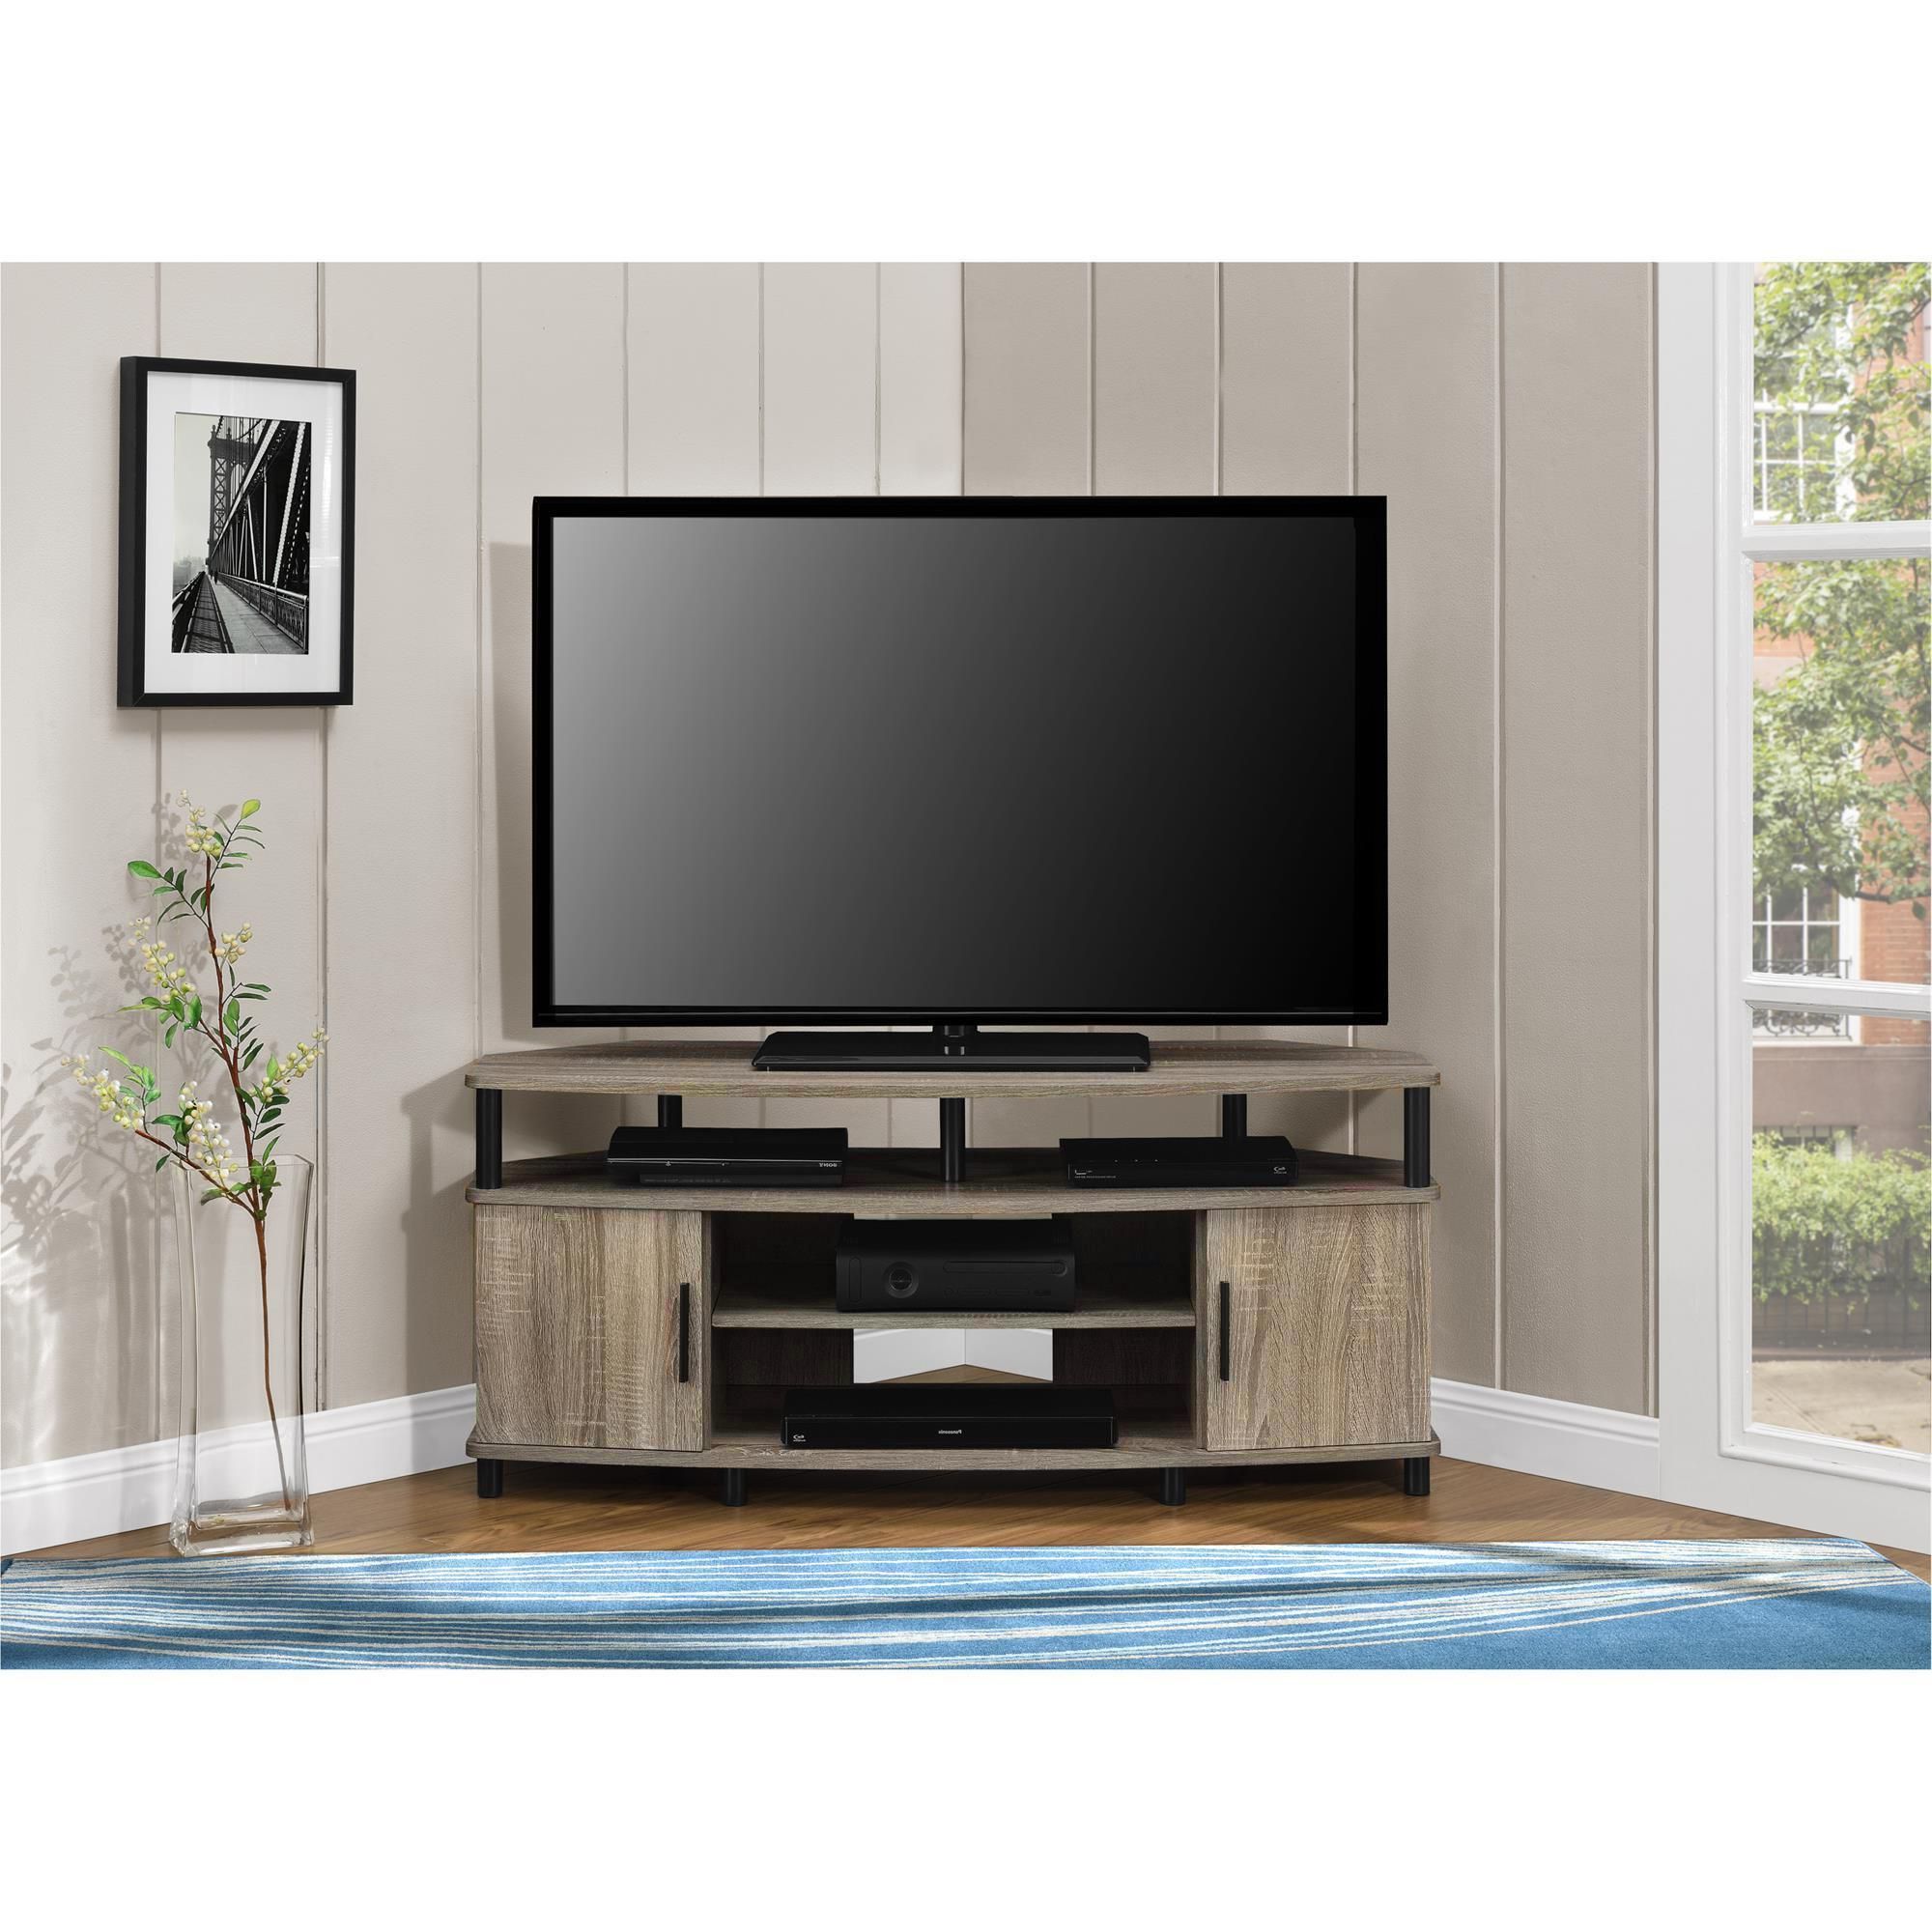 Most Recent 50 Inch Corner Tv Cabinets With Regard To Shop Ameriwood Home Carson 50 Inch Sonoma Oak Corner Tv Stand – Free (Photo 5 of 20)